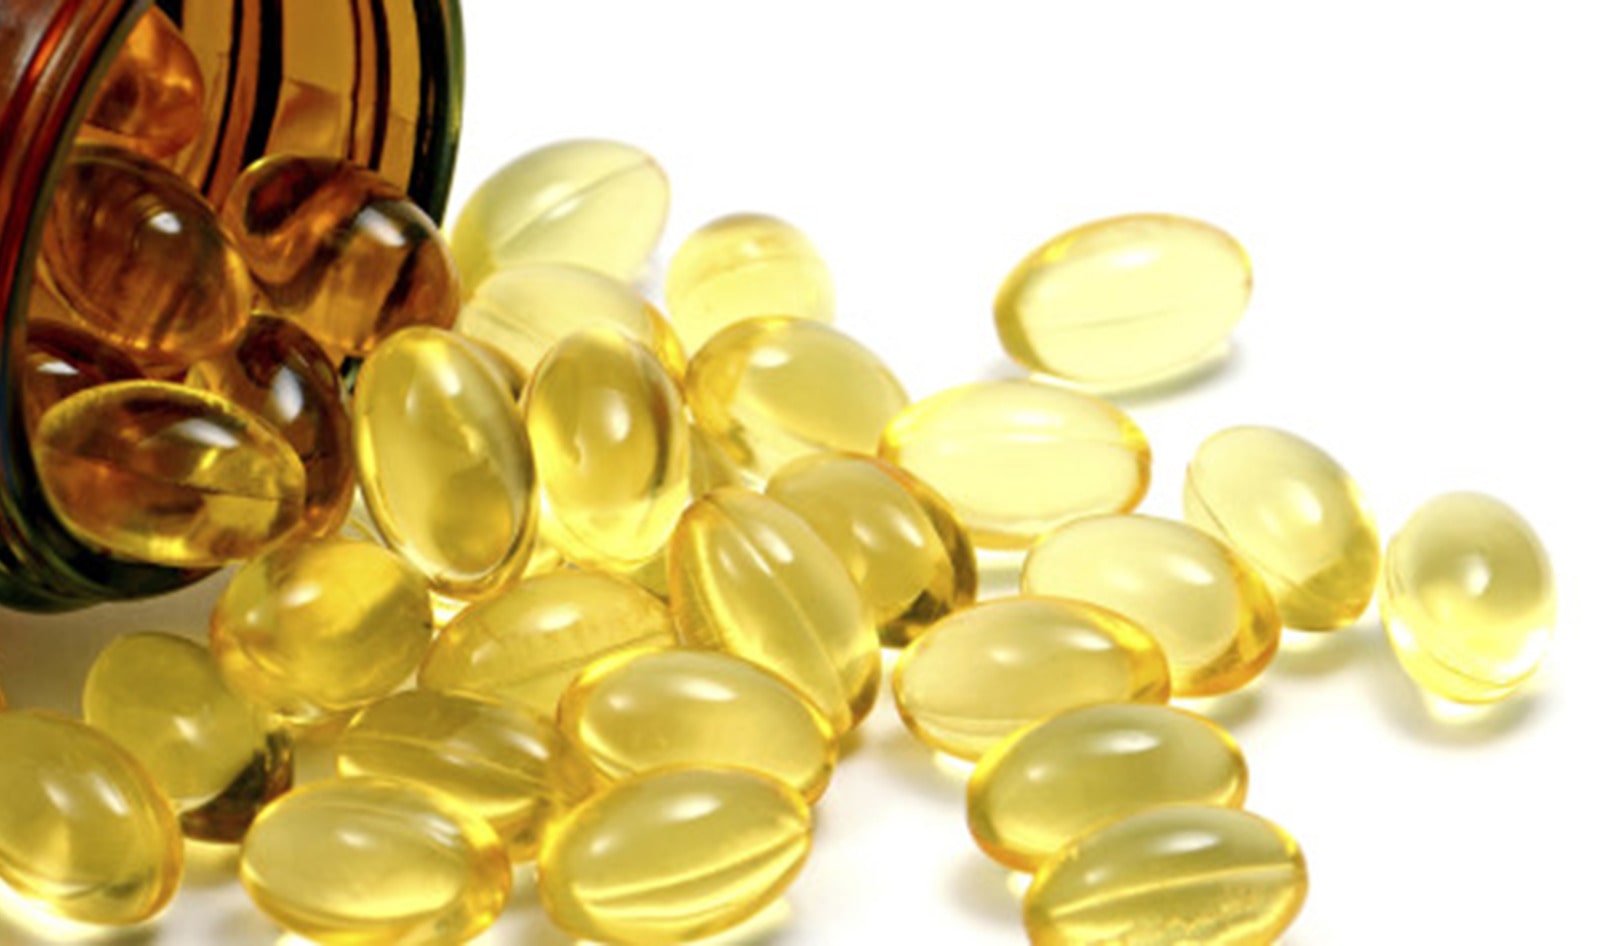 Decade-Long Study Proves Fish Oil is Useless